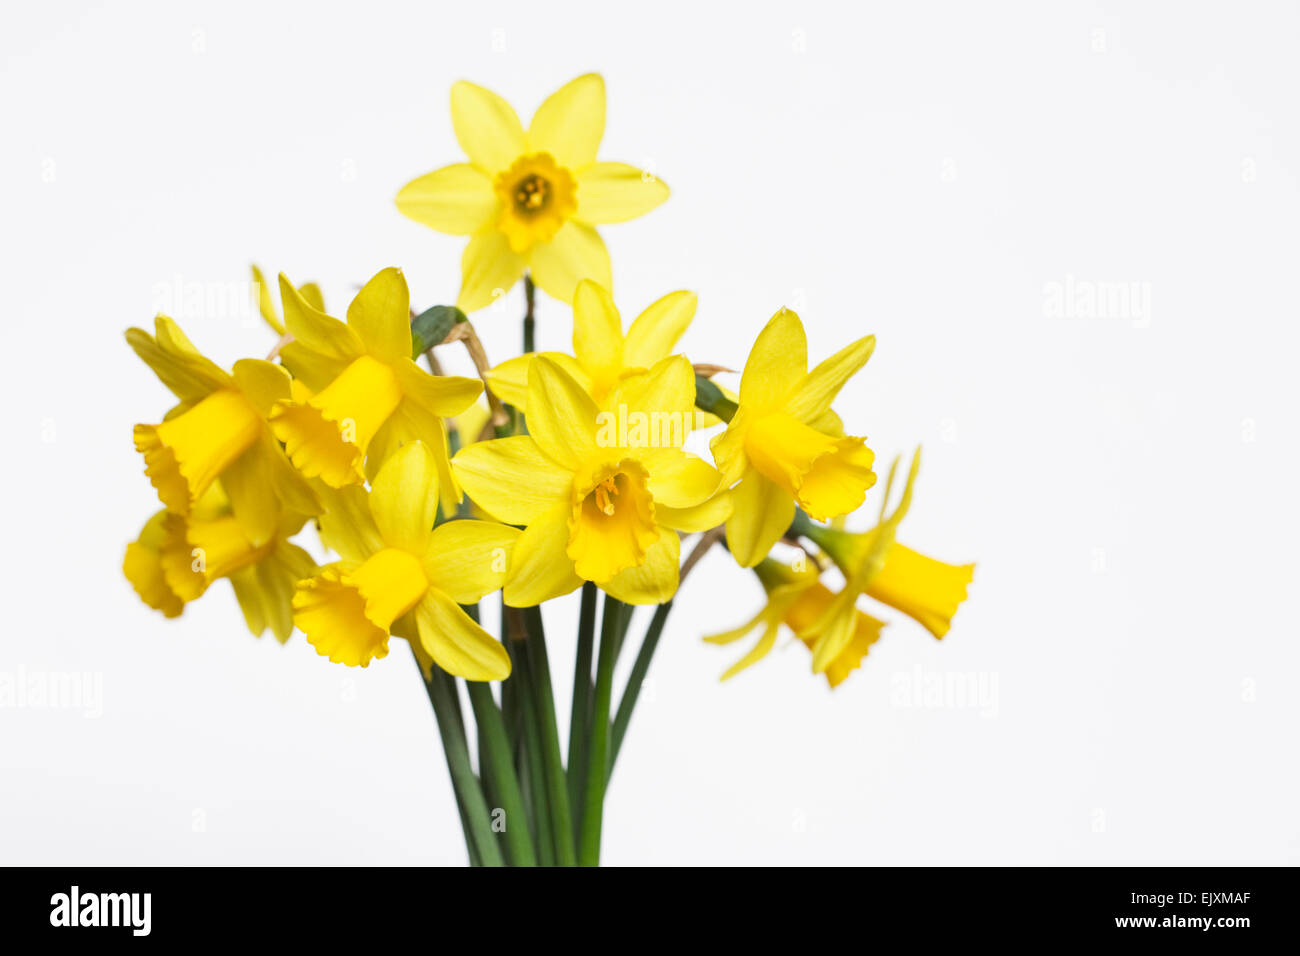 A bunch of miniature daffodils against a white background. Stock Photo